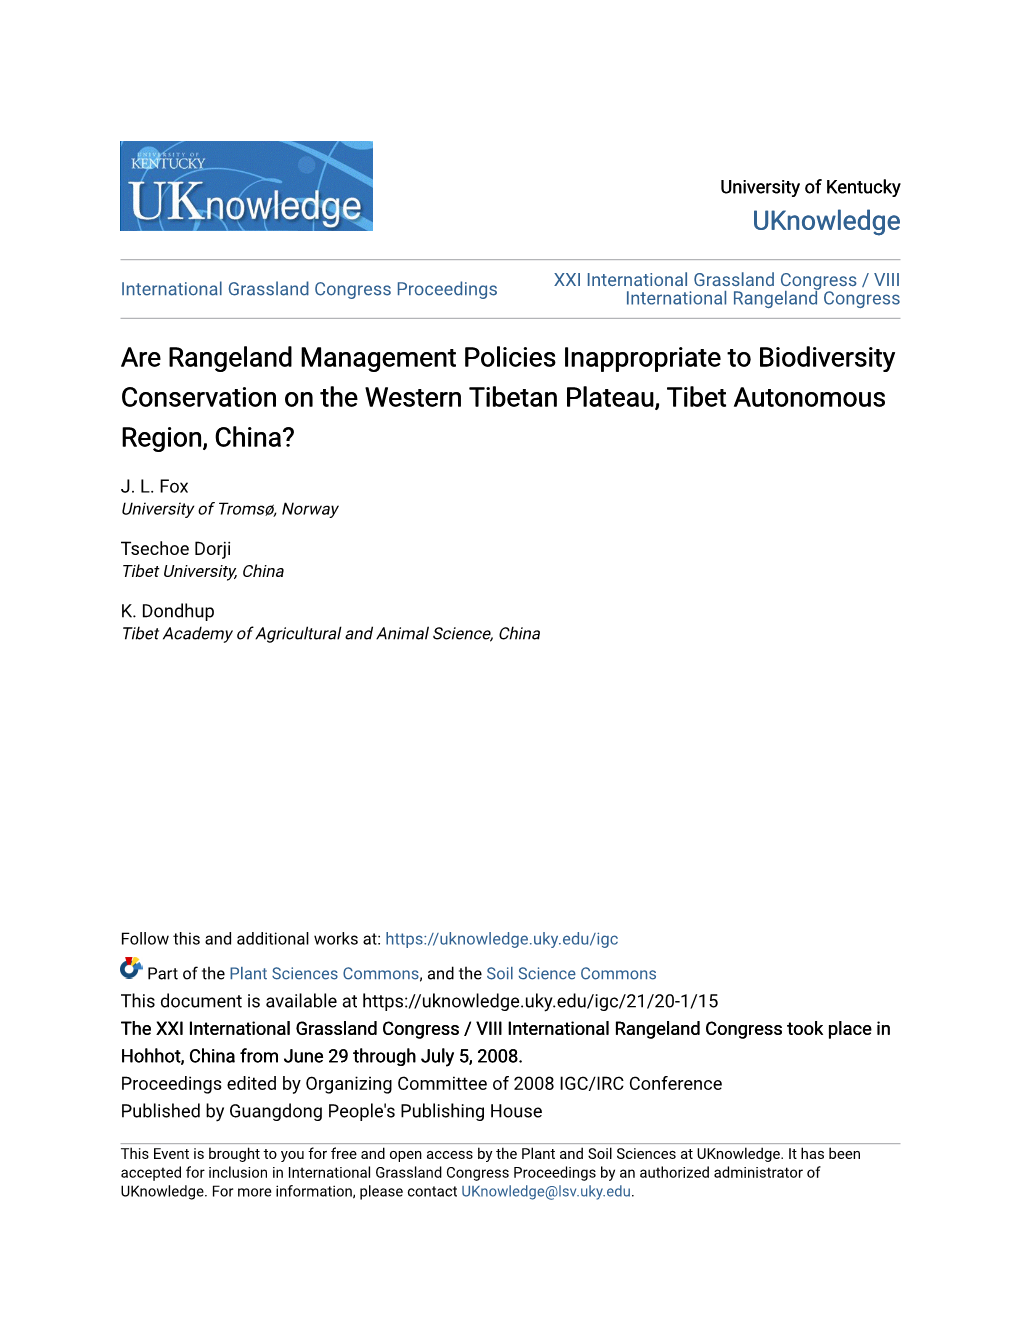 Are Rangeland Management Policies Inappropriate to Biodiversity Conservation on the Western Tibetan Plateau, Tibet Autonomous Region, China?